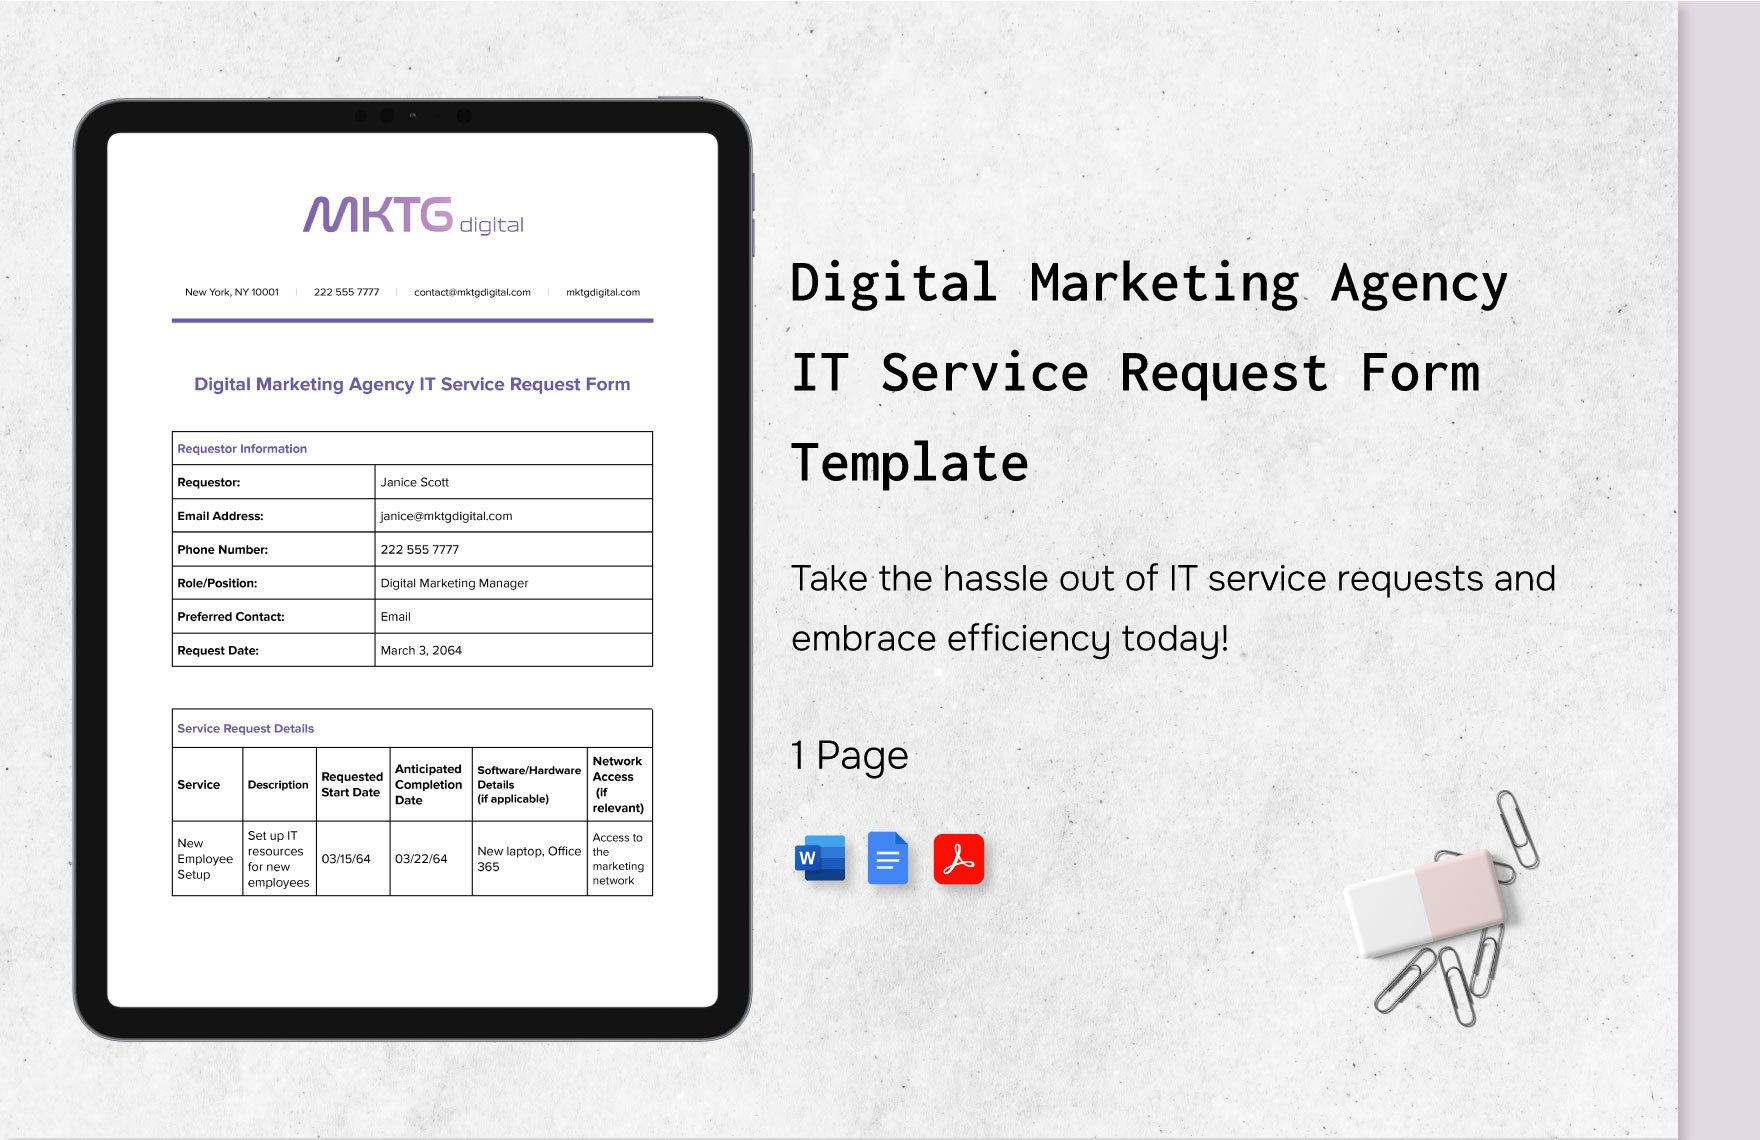 Digital Marketing Agency IT Service Request Form Template